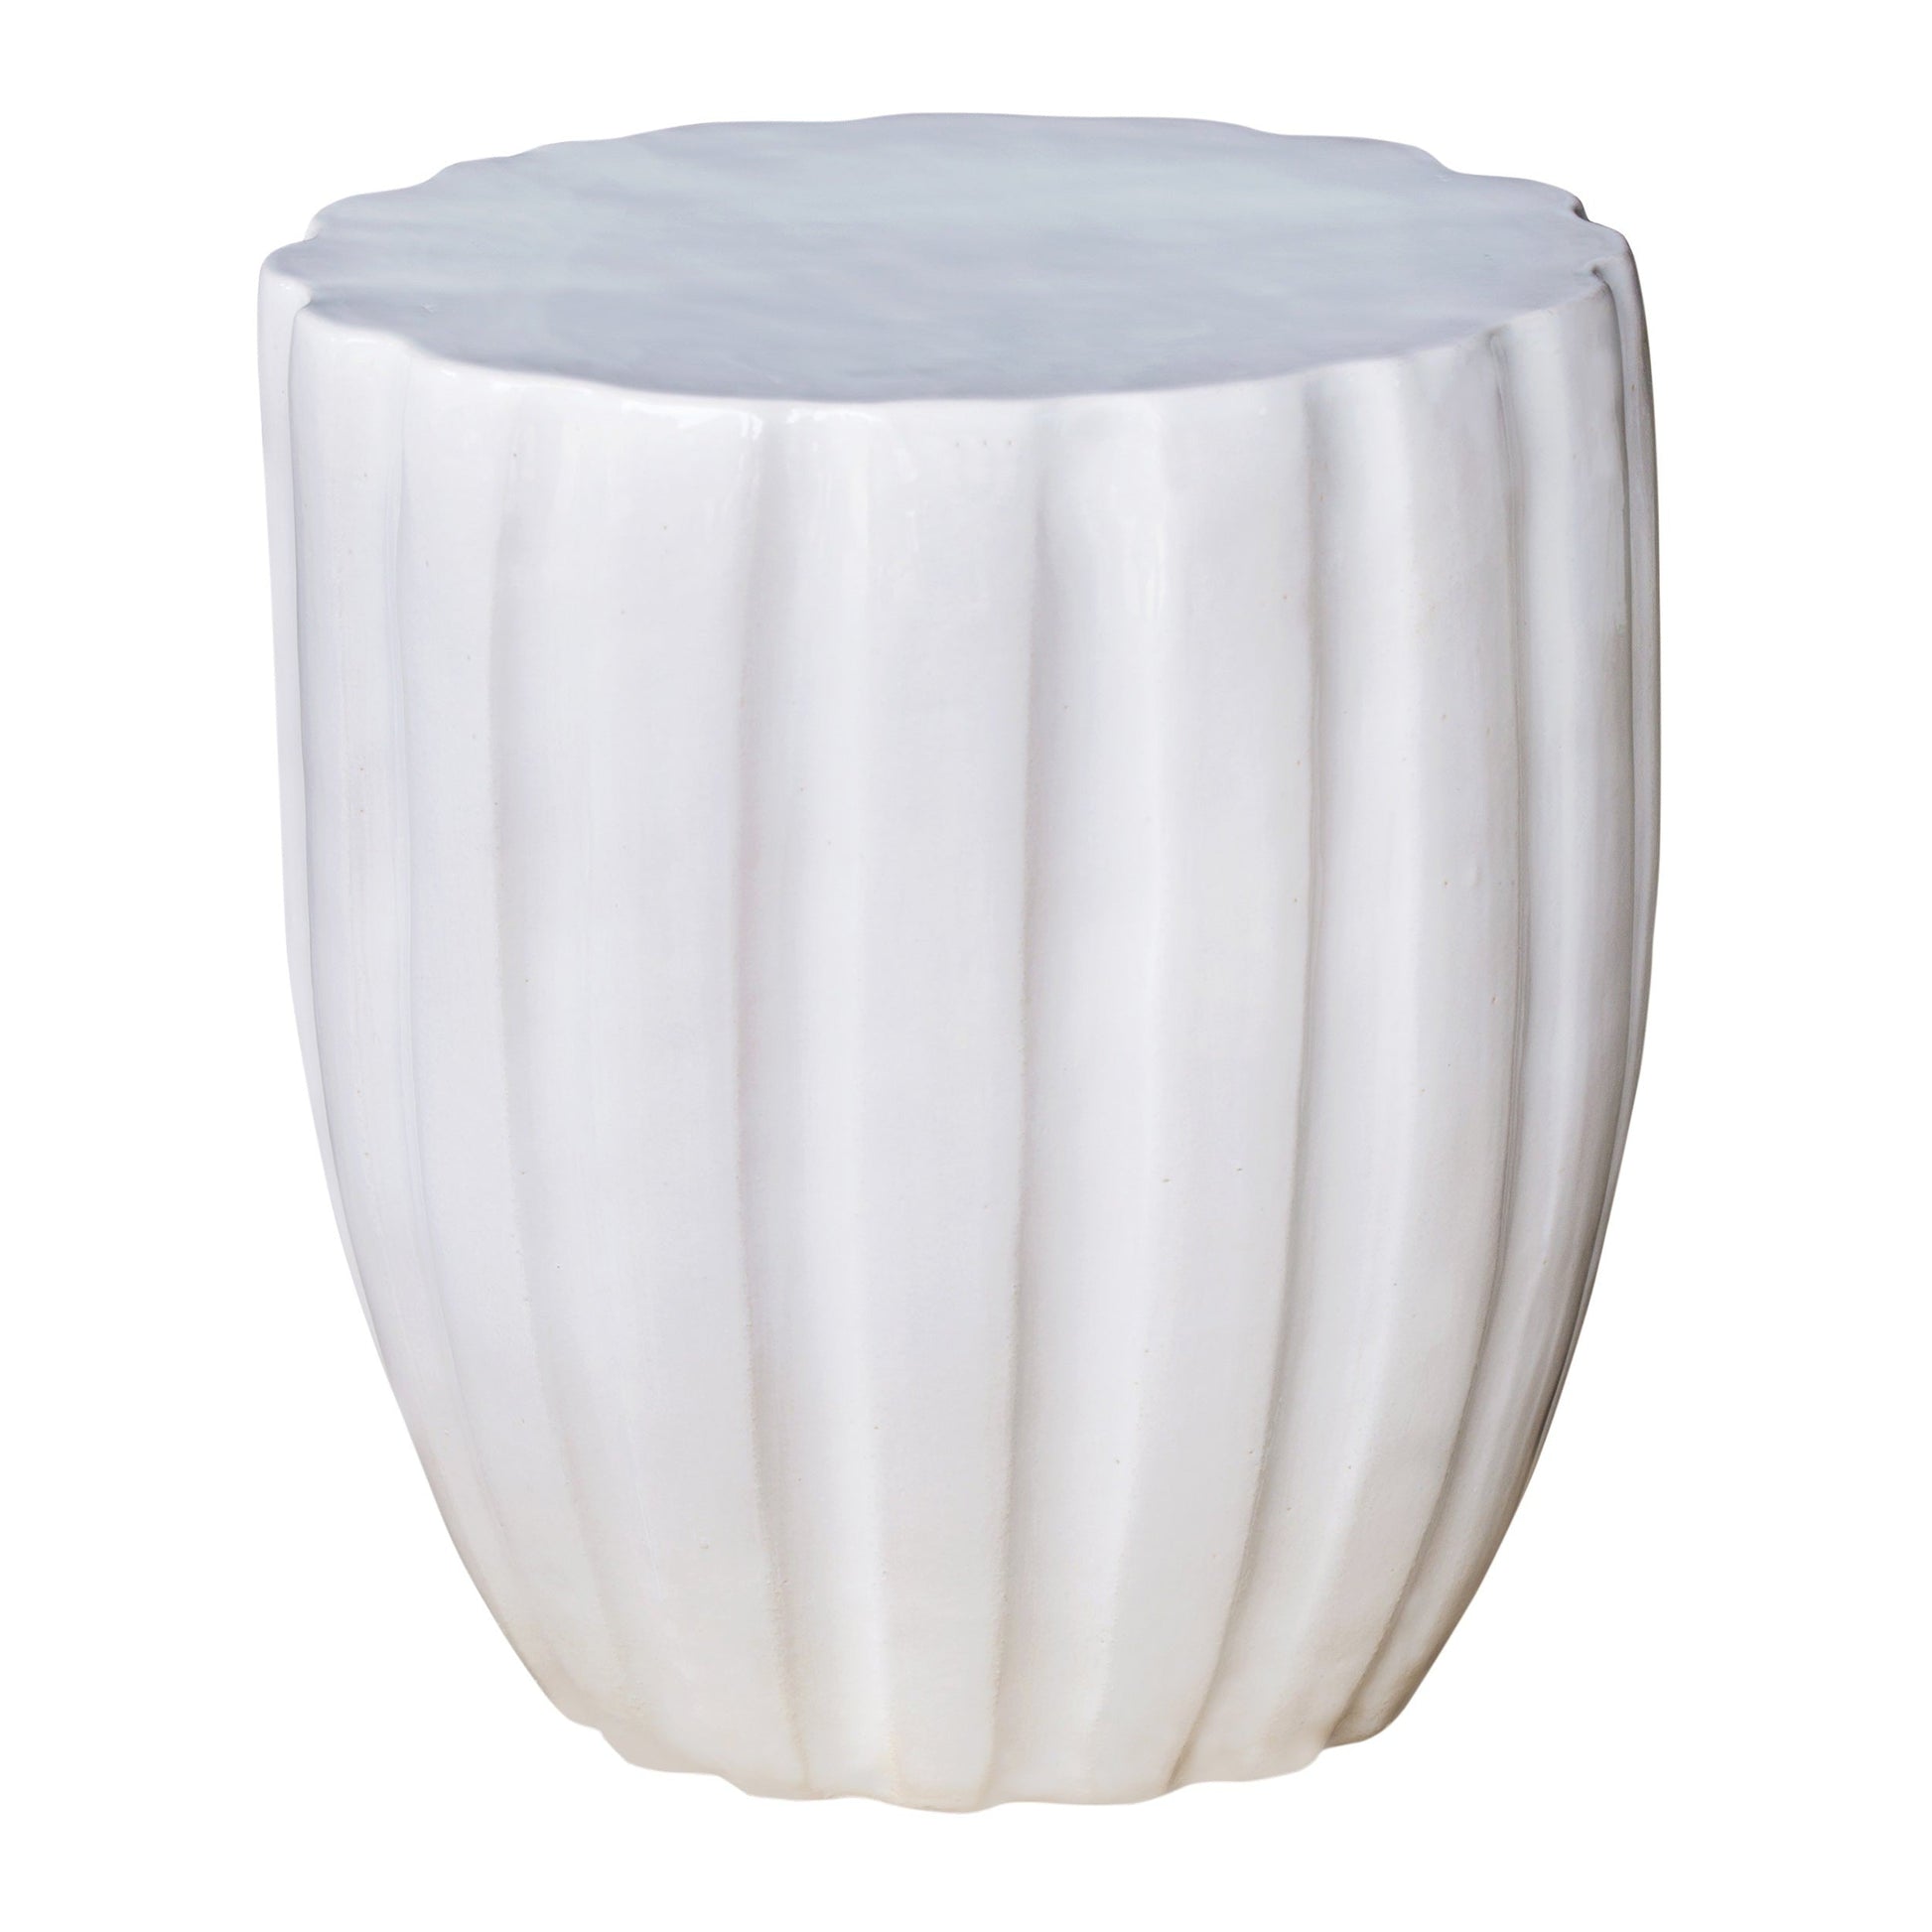 Scallop Stool - Snow White Outdoor Stool-Poufs and Stools-Seasonal Living-Sideboards and Things